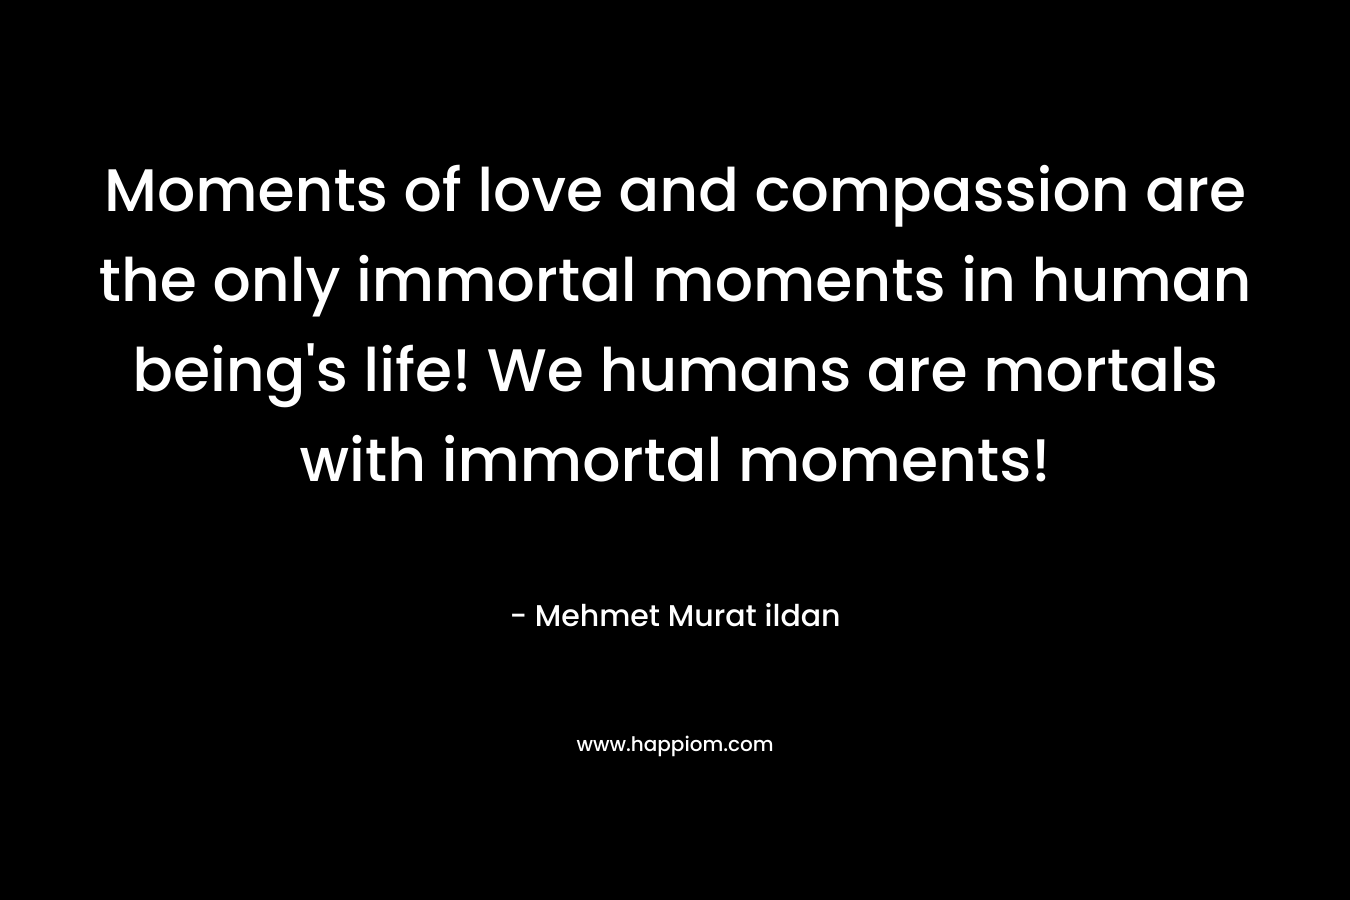 Moments of love and compassion are the only immortal moments in human being's life! We humans are mortals with immortal moments!